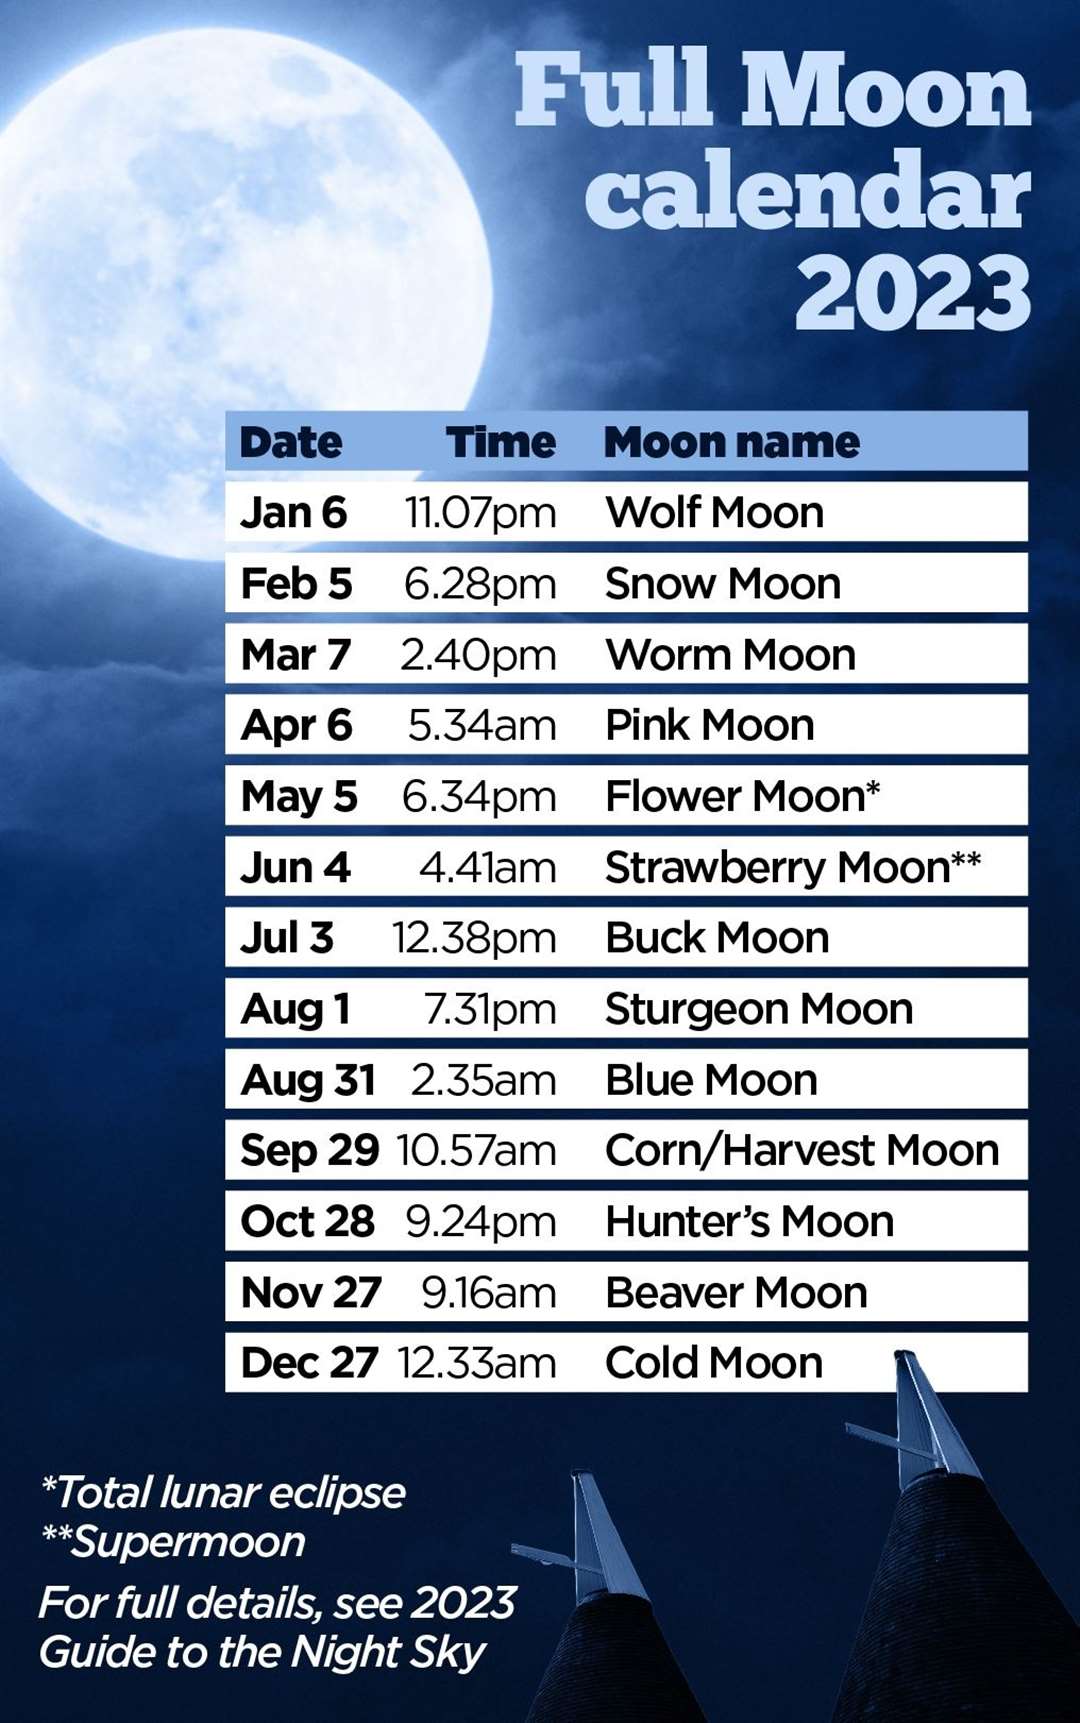 Each full moon of the year is given a name